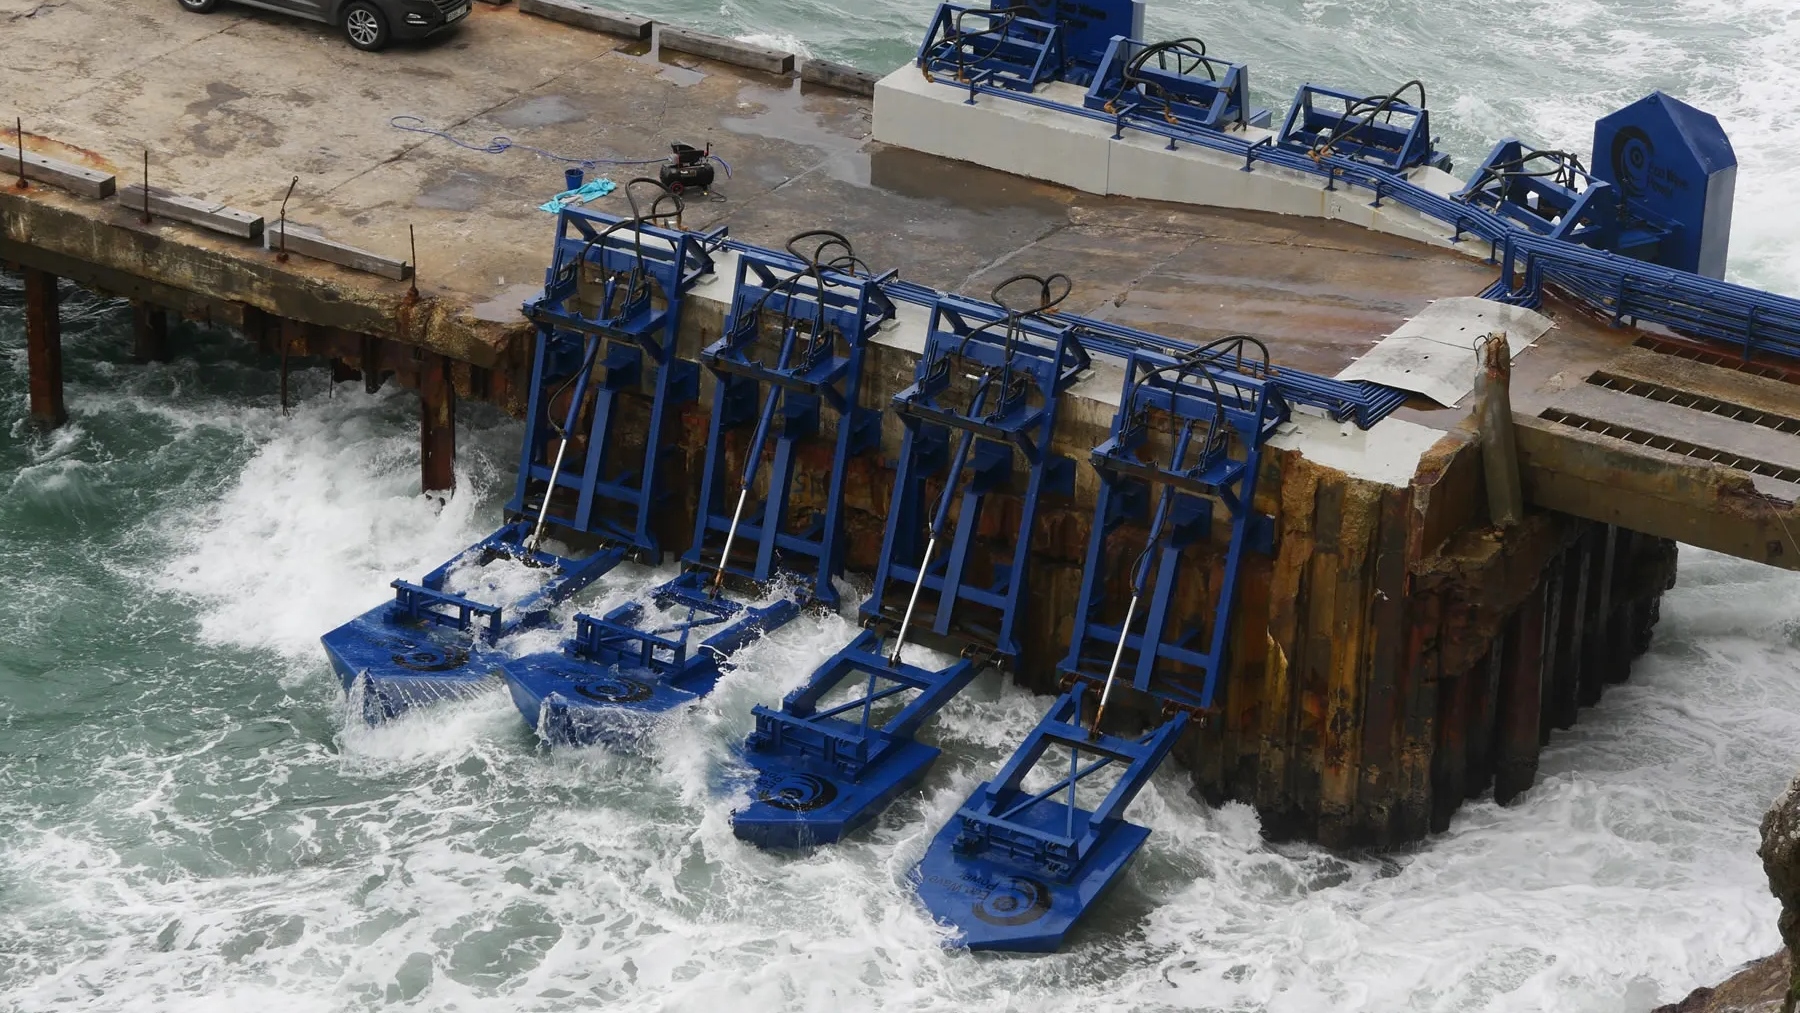 Four blue metal contraptions attached to a pier are battered by waves.